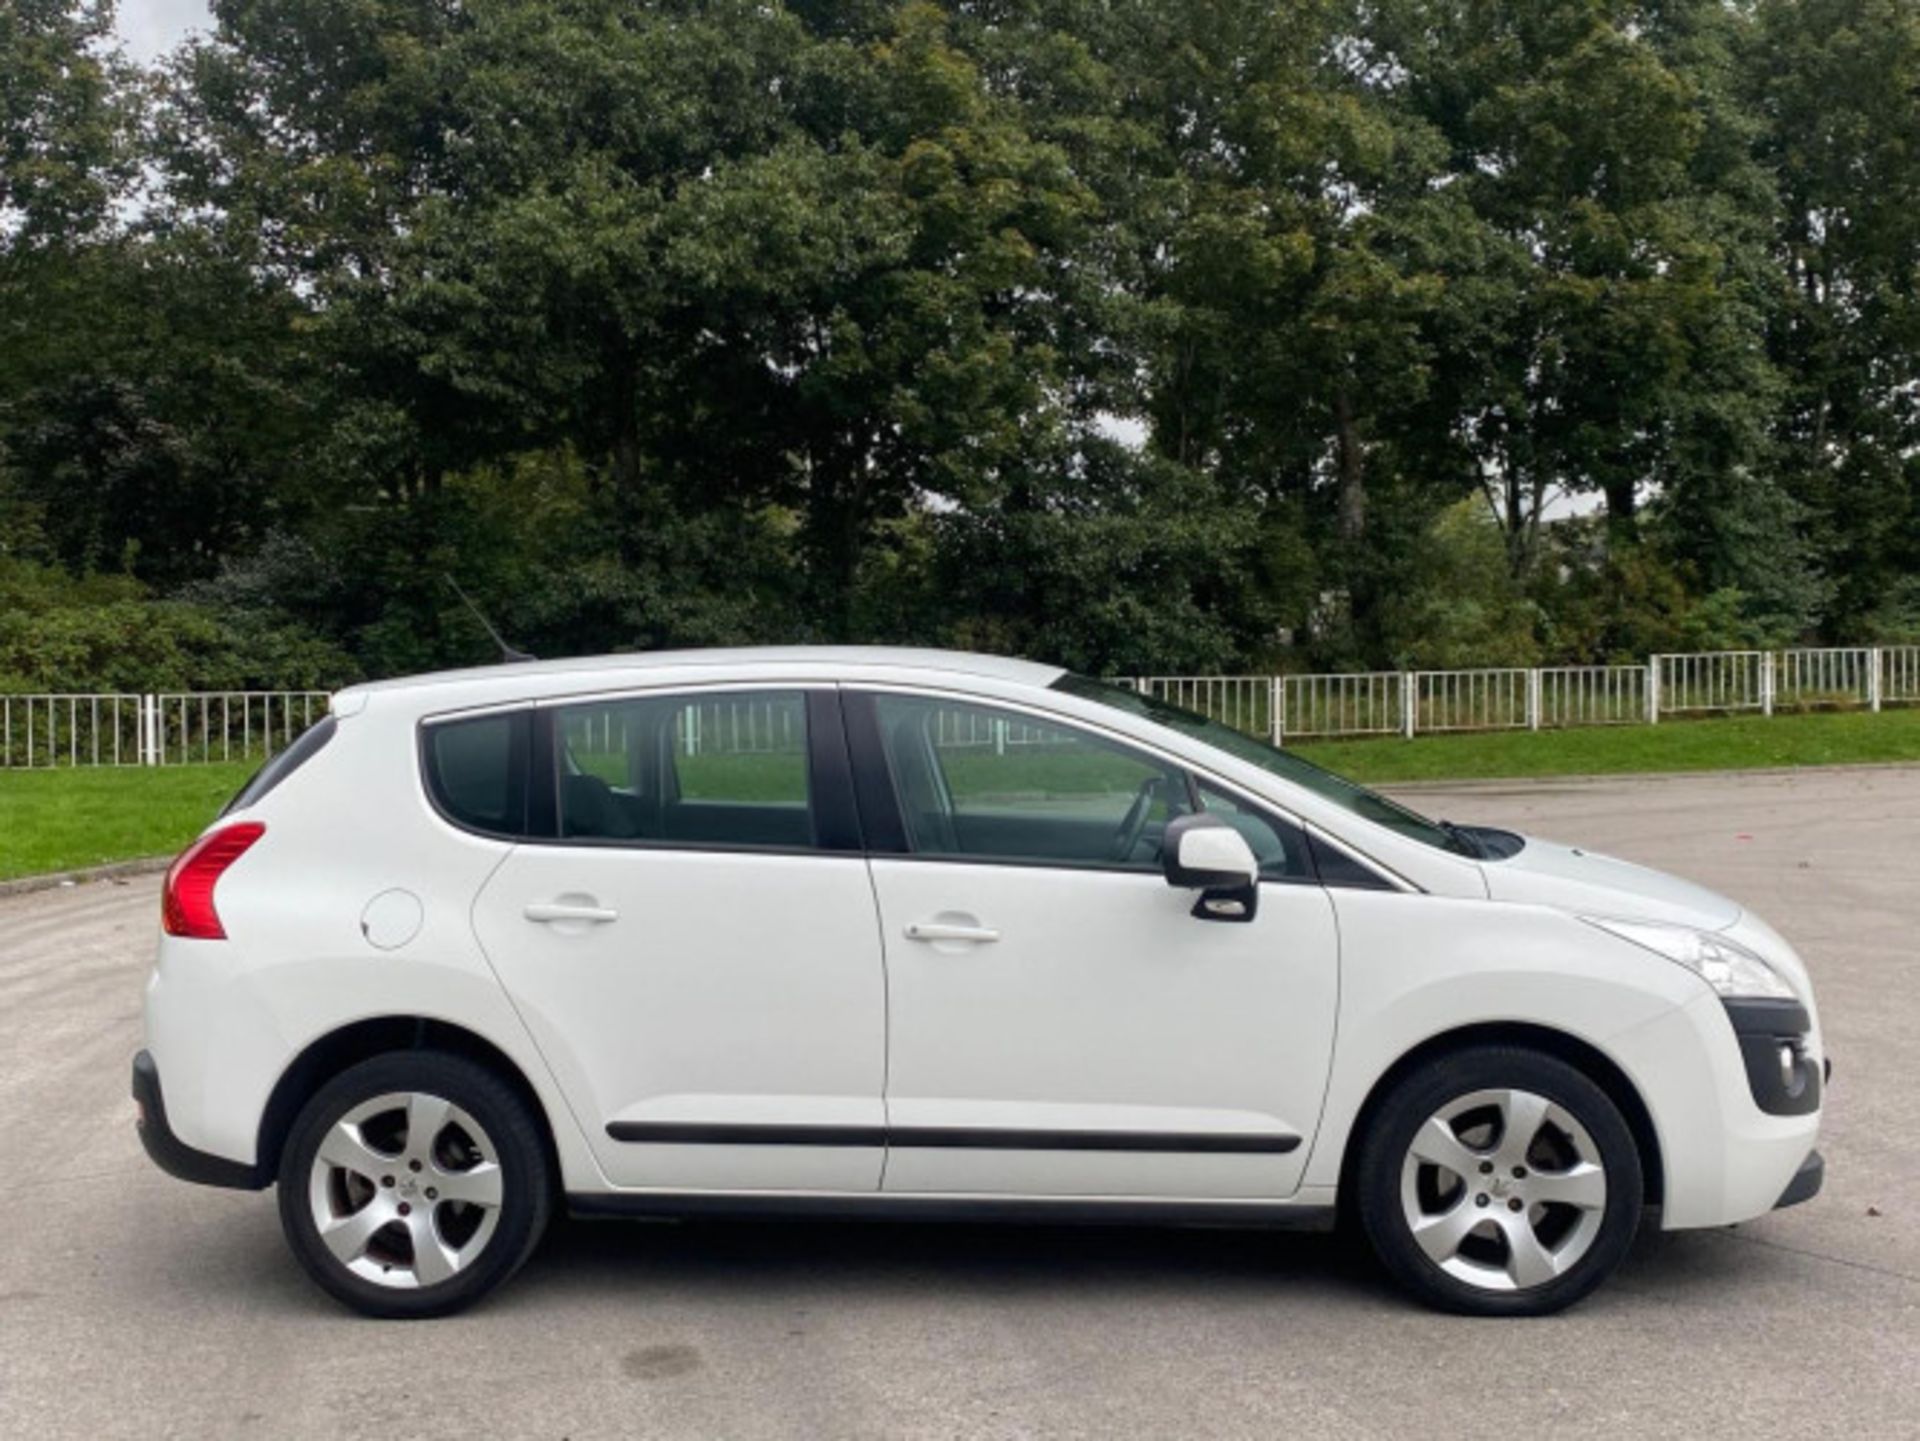 2013 PEUGEOT 3008 1.6 HDI ACTIVE EURO 5 5DR >>--NO VAT ON HAMMER--<< - Image 69 of 69